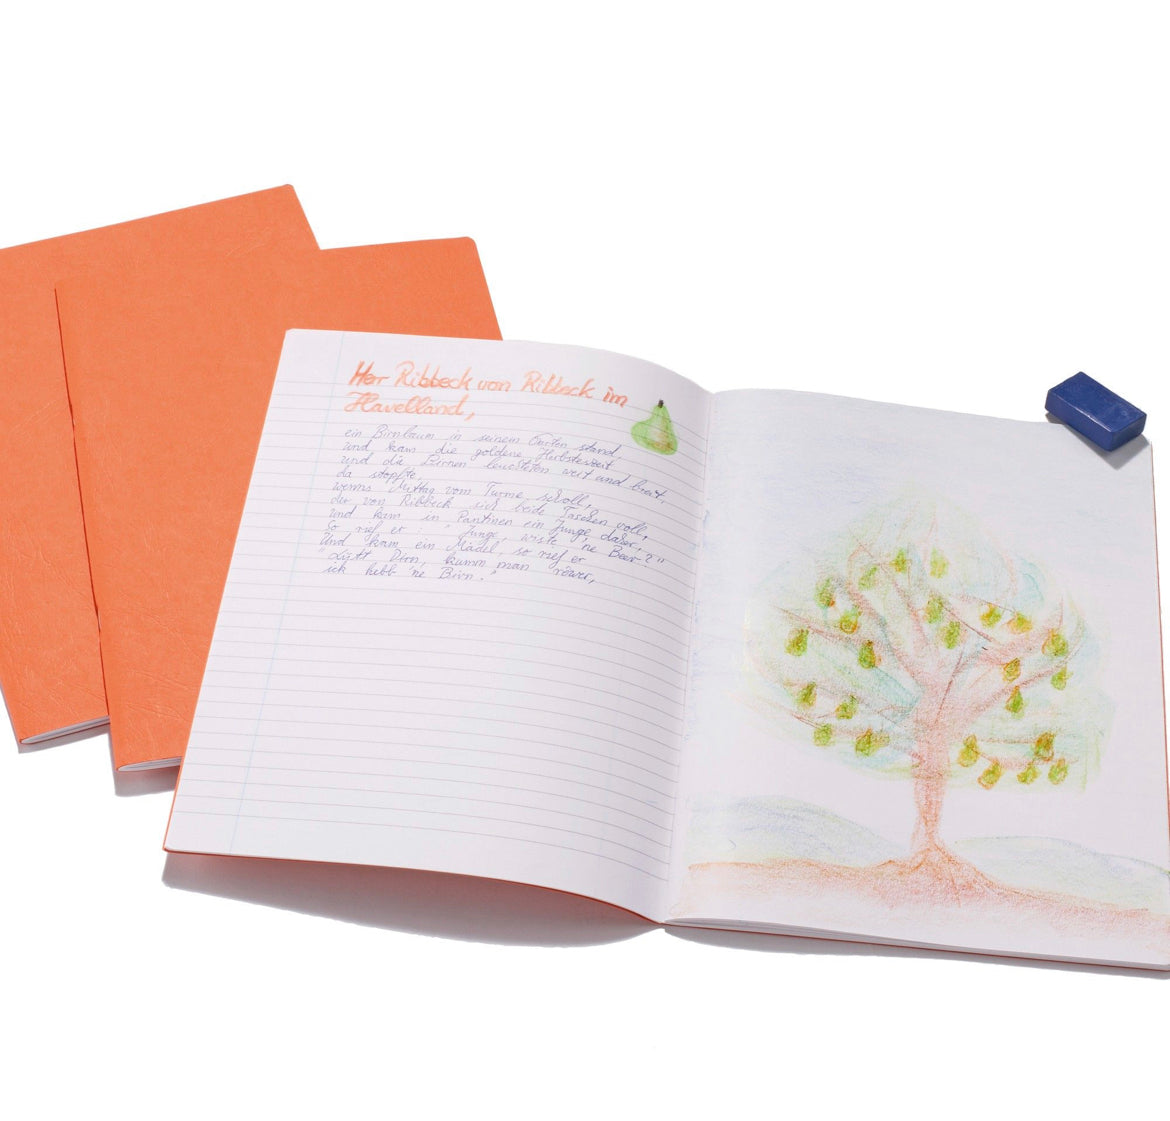 Composition Book for Poetry, 8.27"x11.69" | 4-Sheets Lined, 1 Drawing Sheet - Orange Homeschool - Alder & Alouette